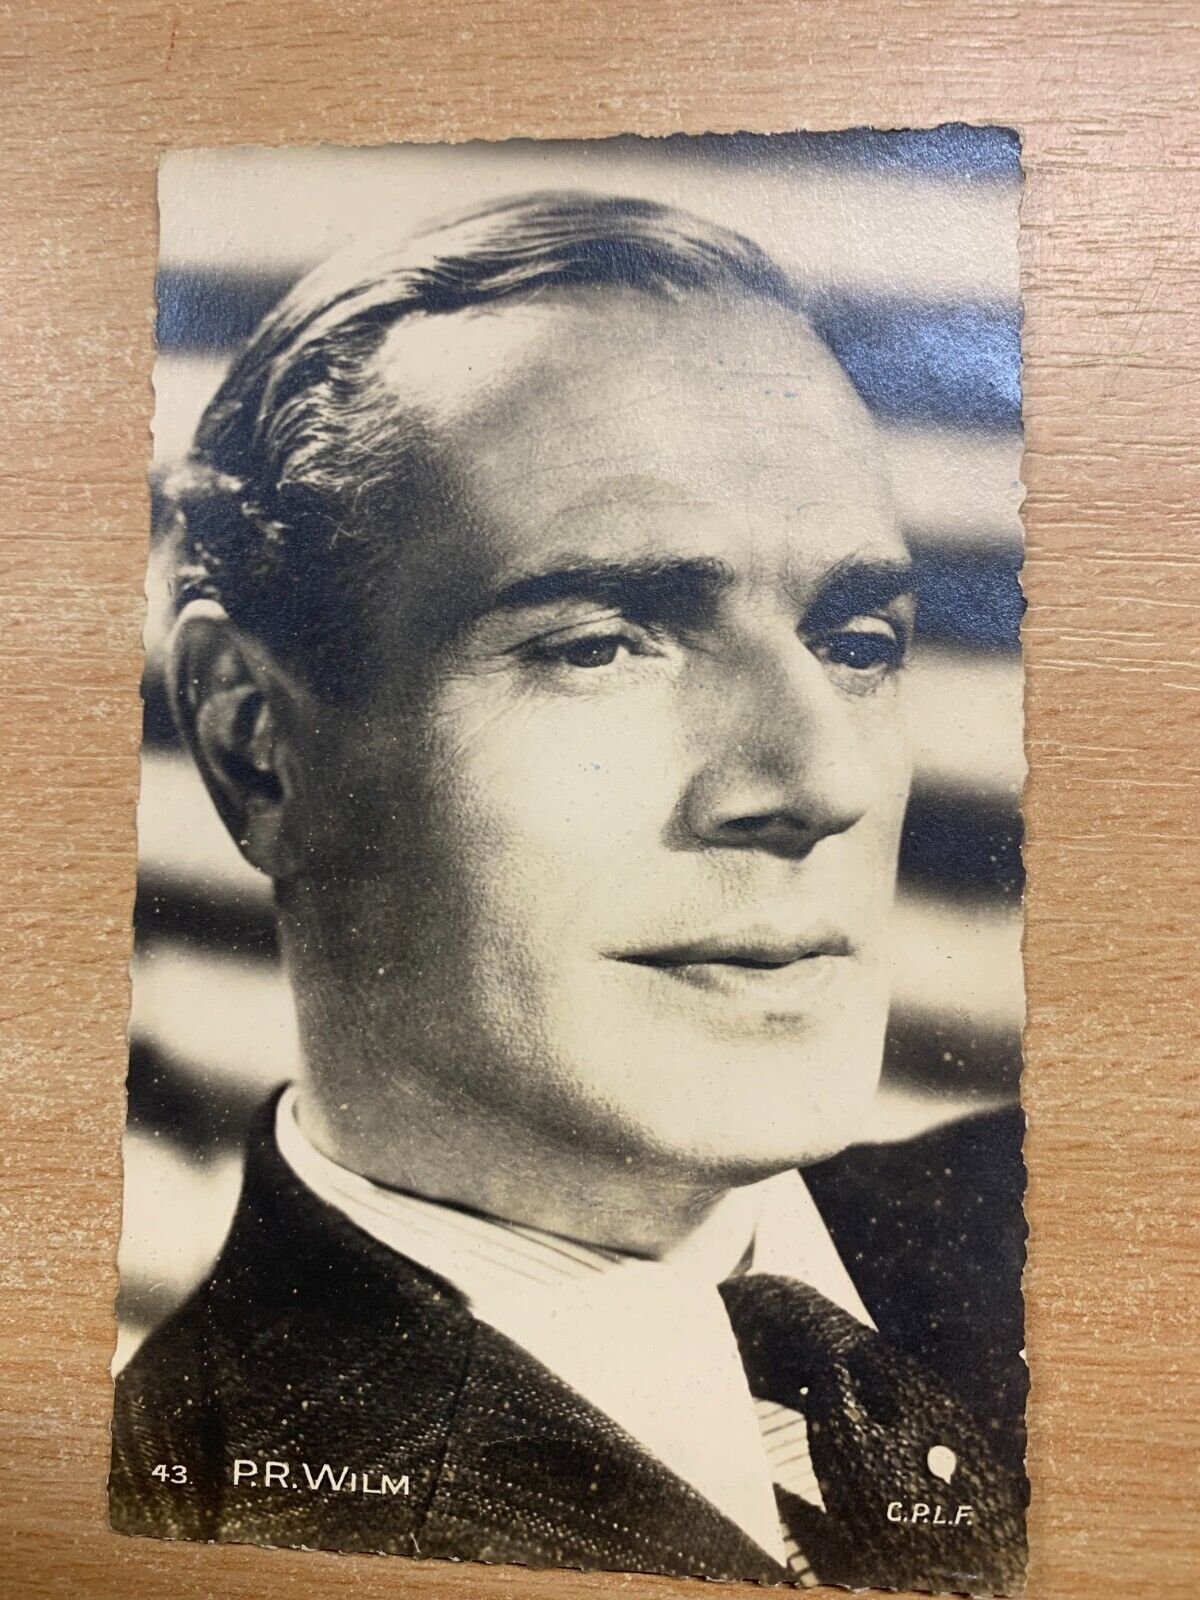 VINTAGE PIERRE RICHARD WILLM FRENCH ACTOR PHOTO POSTCARD (LL)